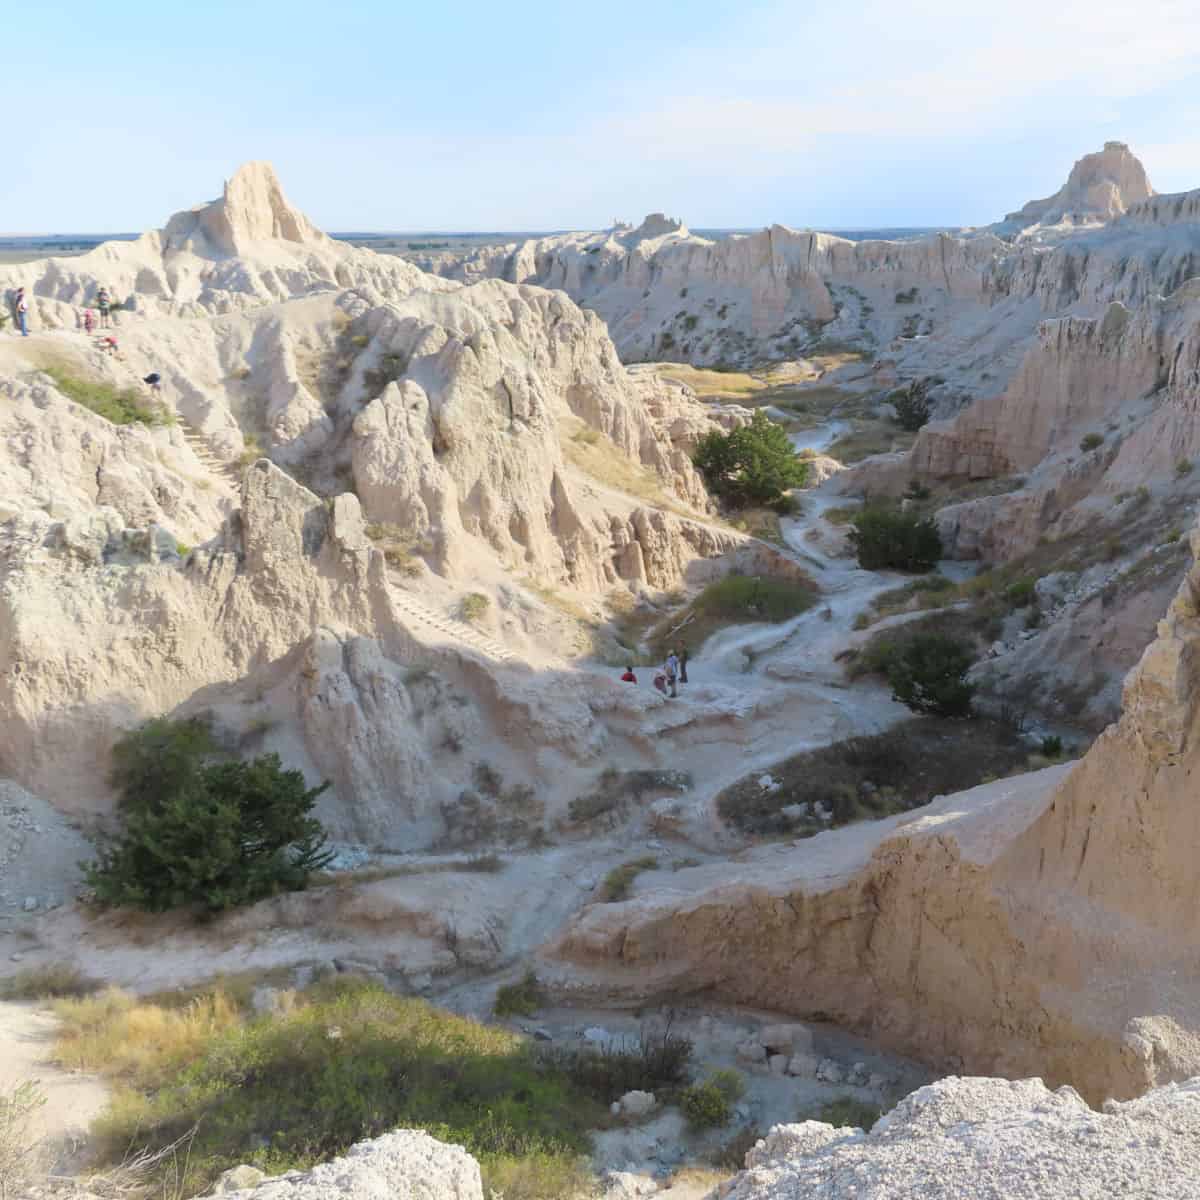 View of the Notch Trail and the log ladder to get to the top in Badlands National Park